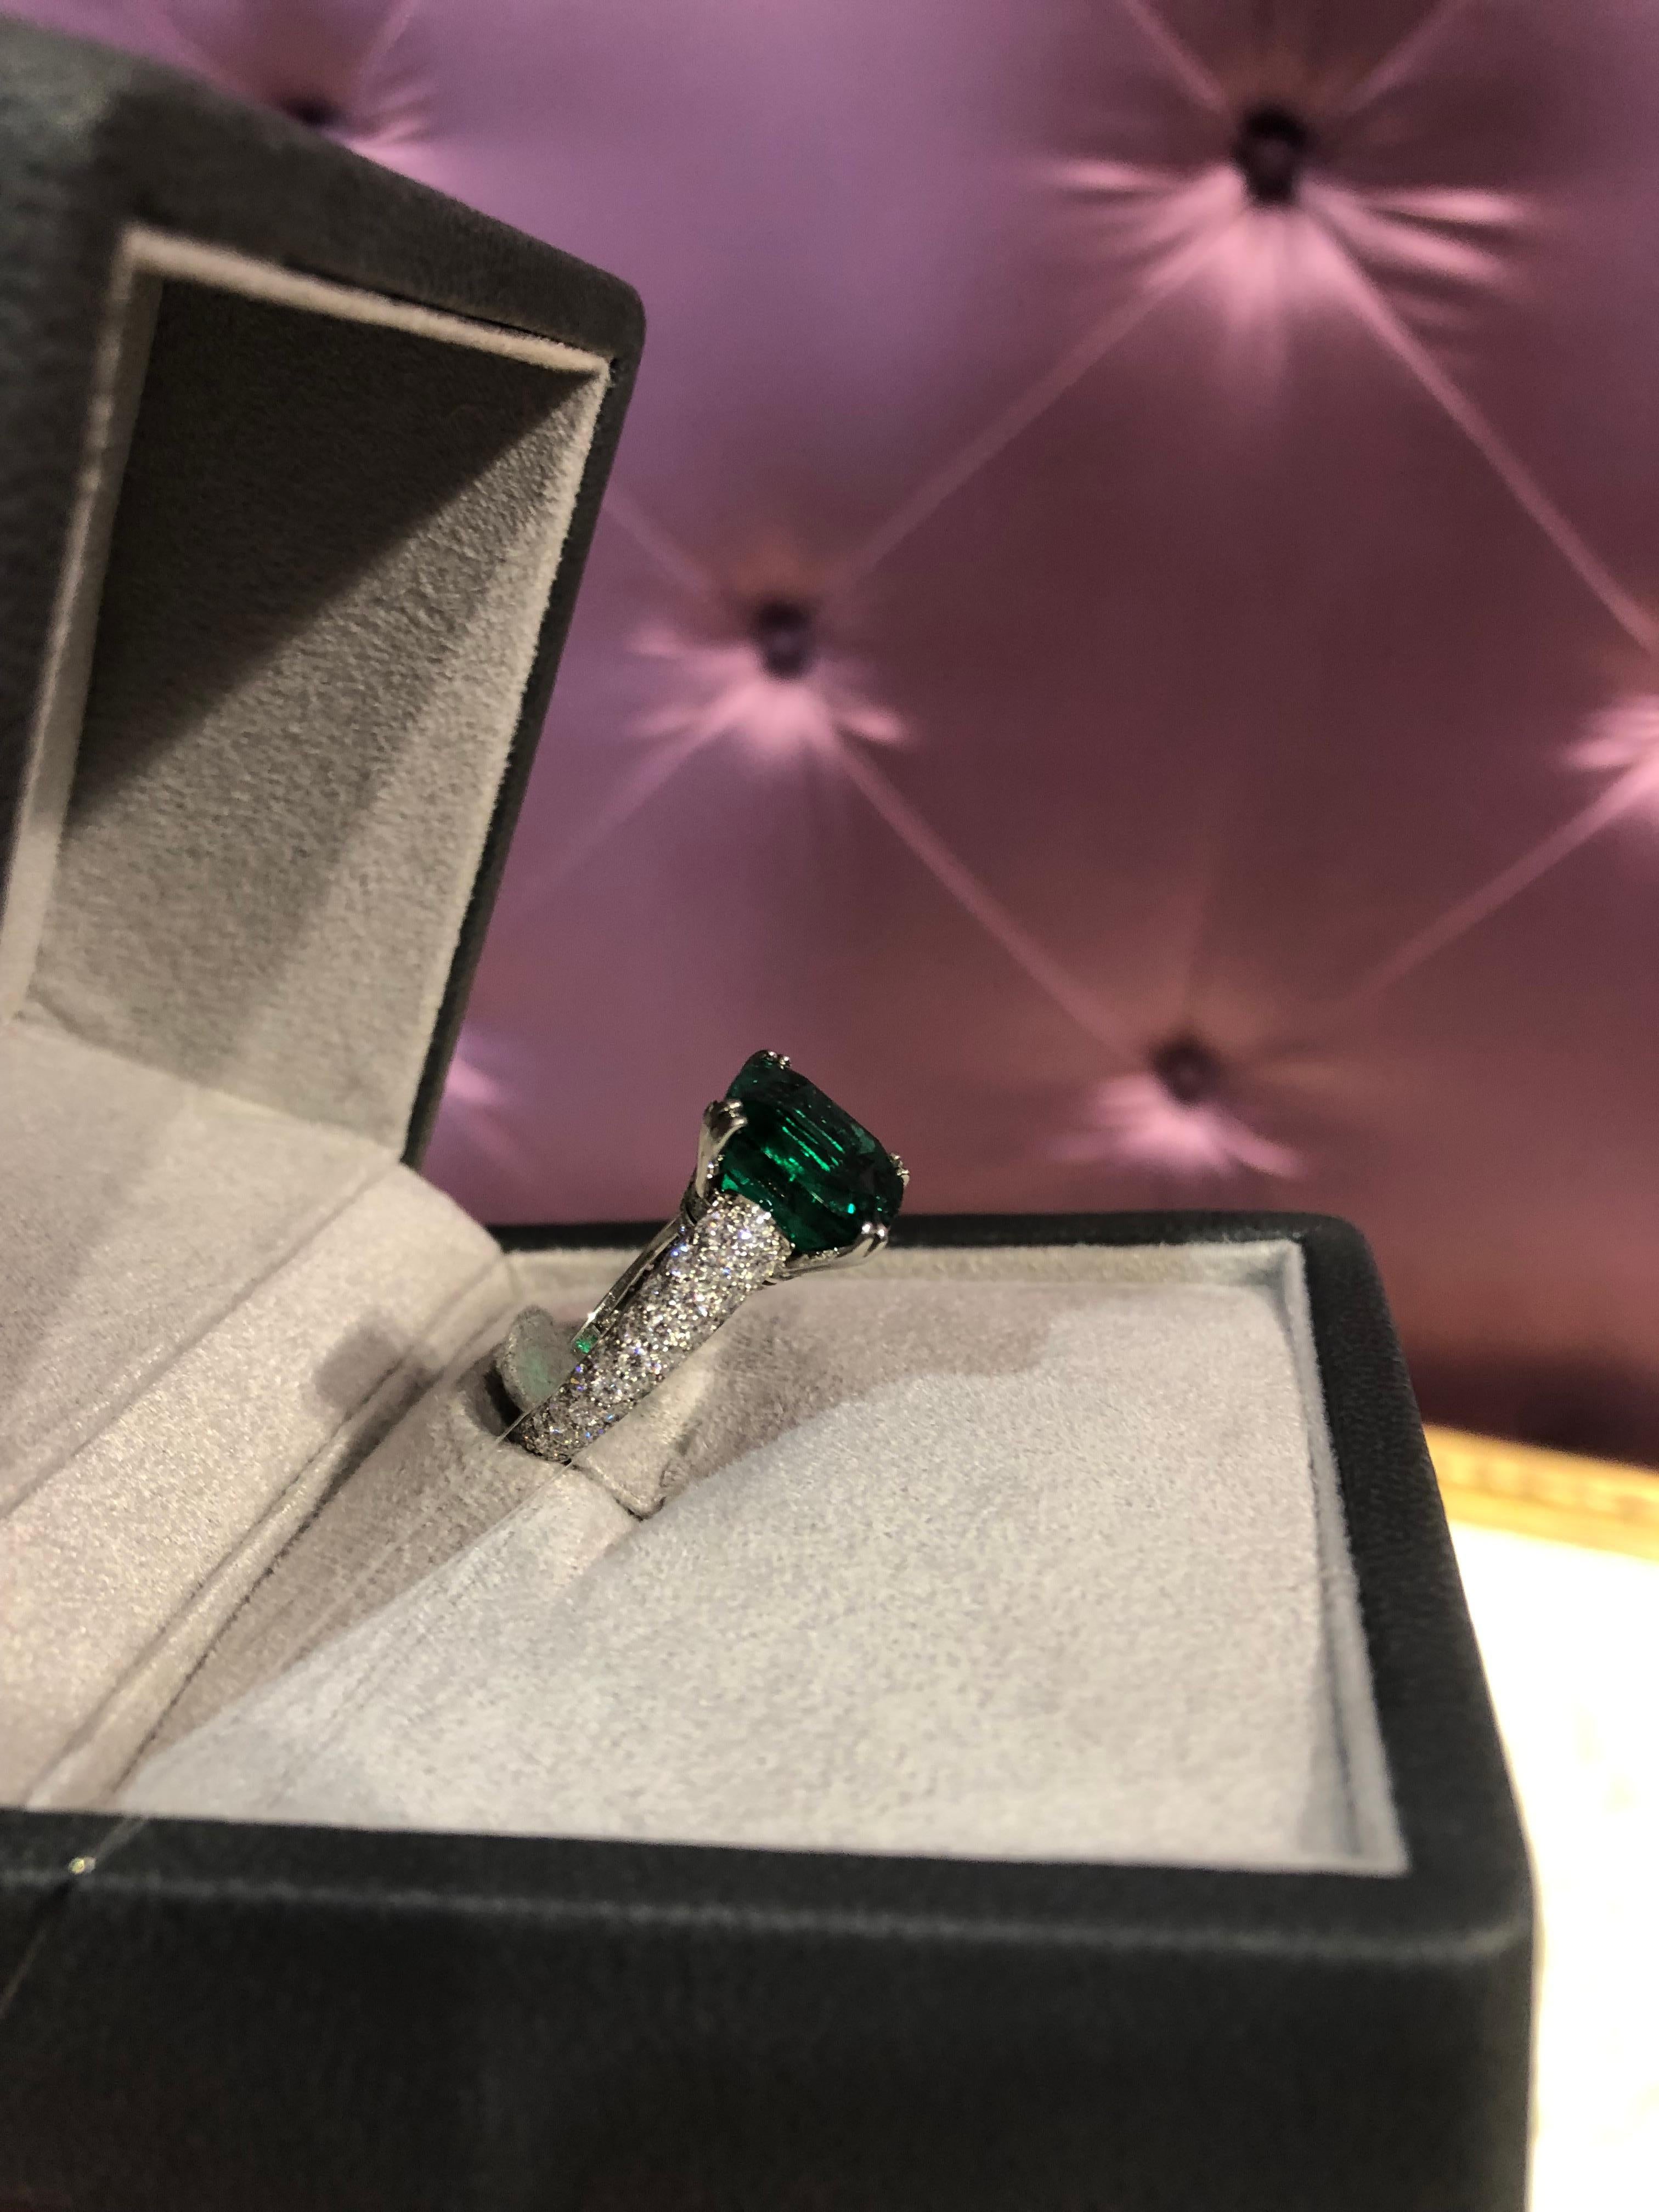 Three Colours of Love Emerald Ring
103RG180/1

The Three Colours of Love  Collection exemplifies ‘The Life in Colour’, seamlessly
fusing extraordinary coloured gemstones, artistic ingenuity and
exceptional craftsmanship. Fabergé’s vibrant gemstones